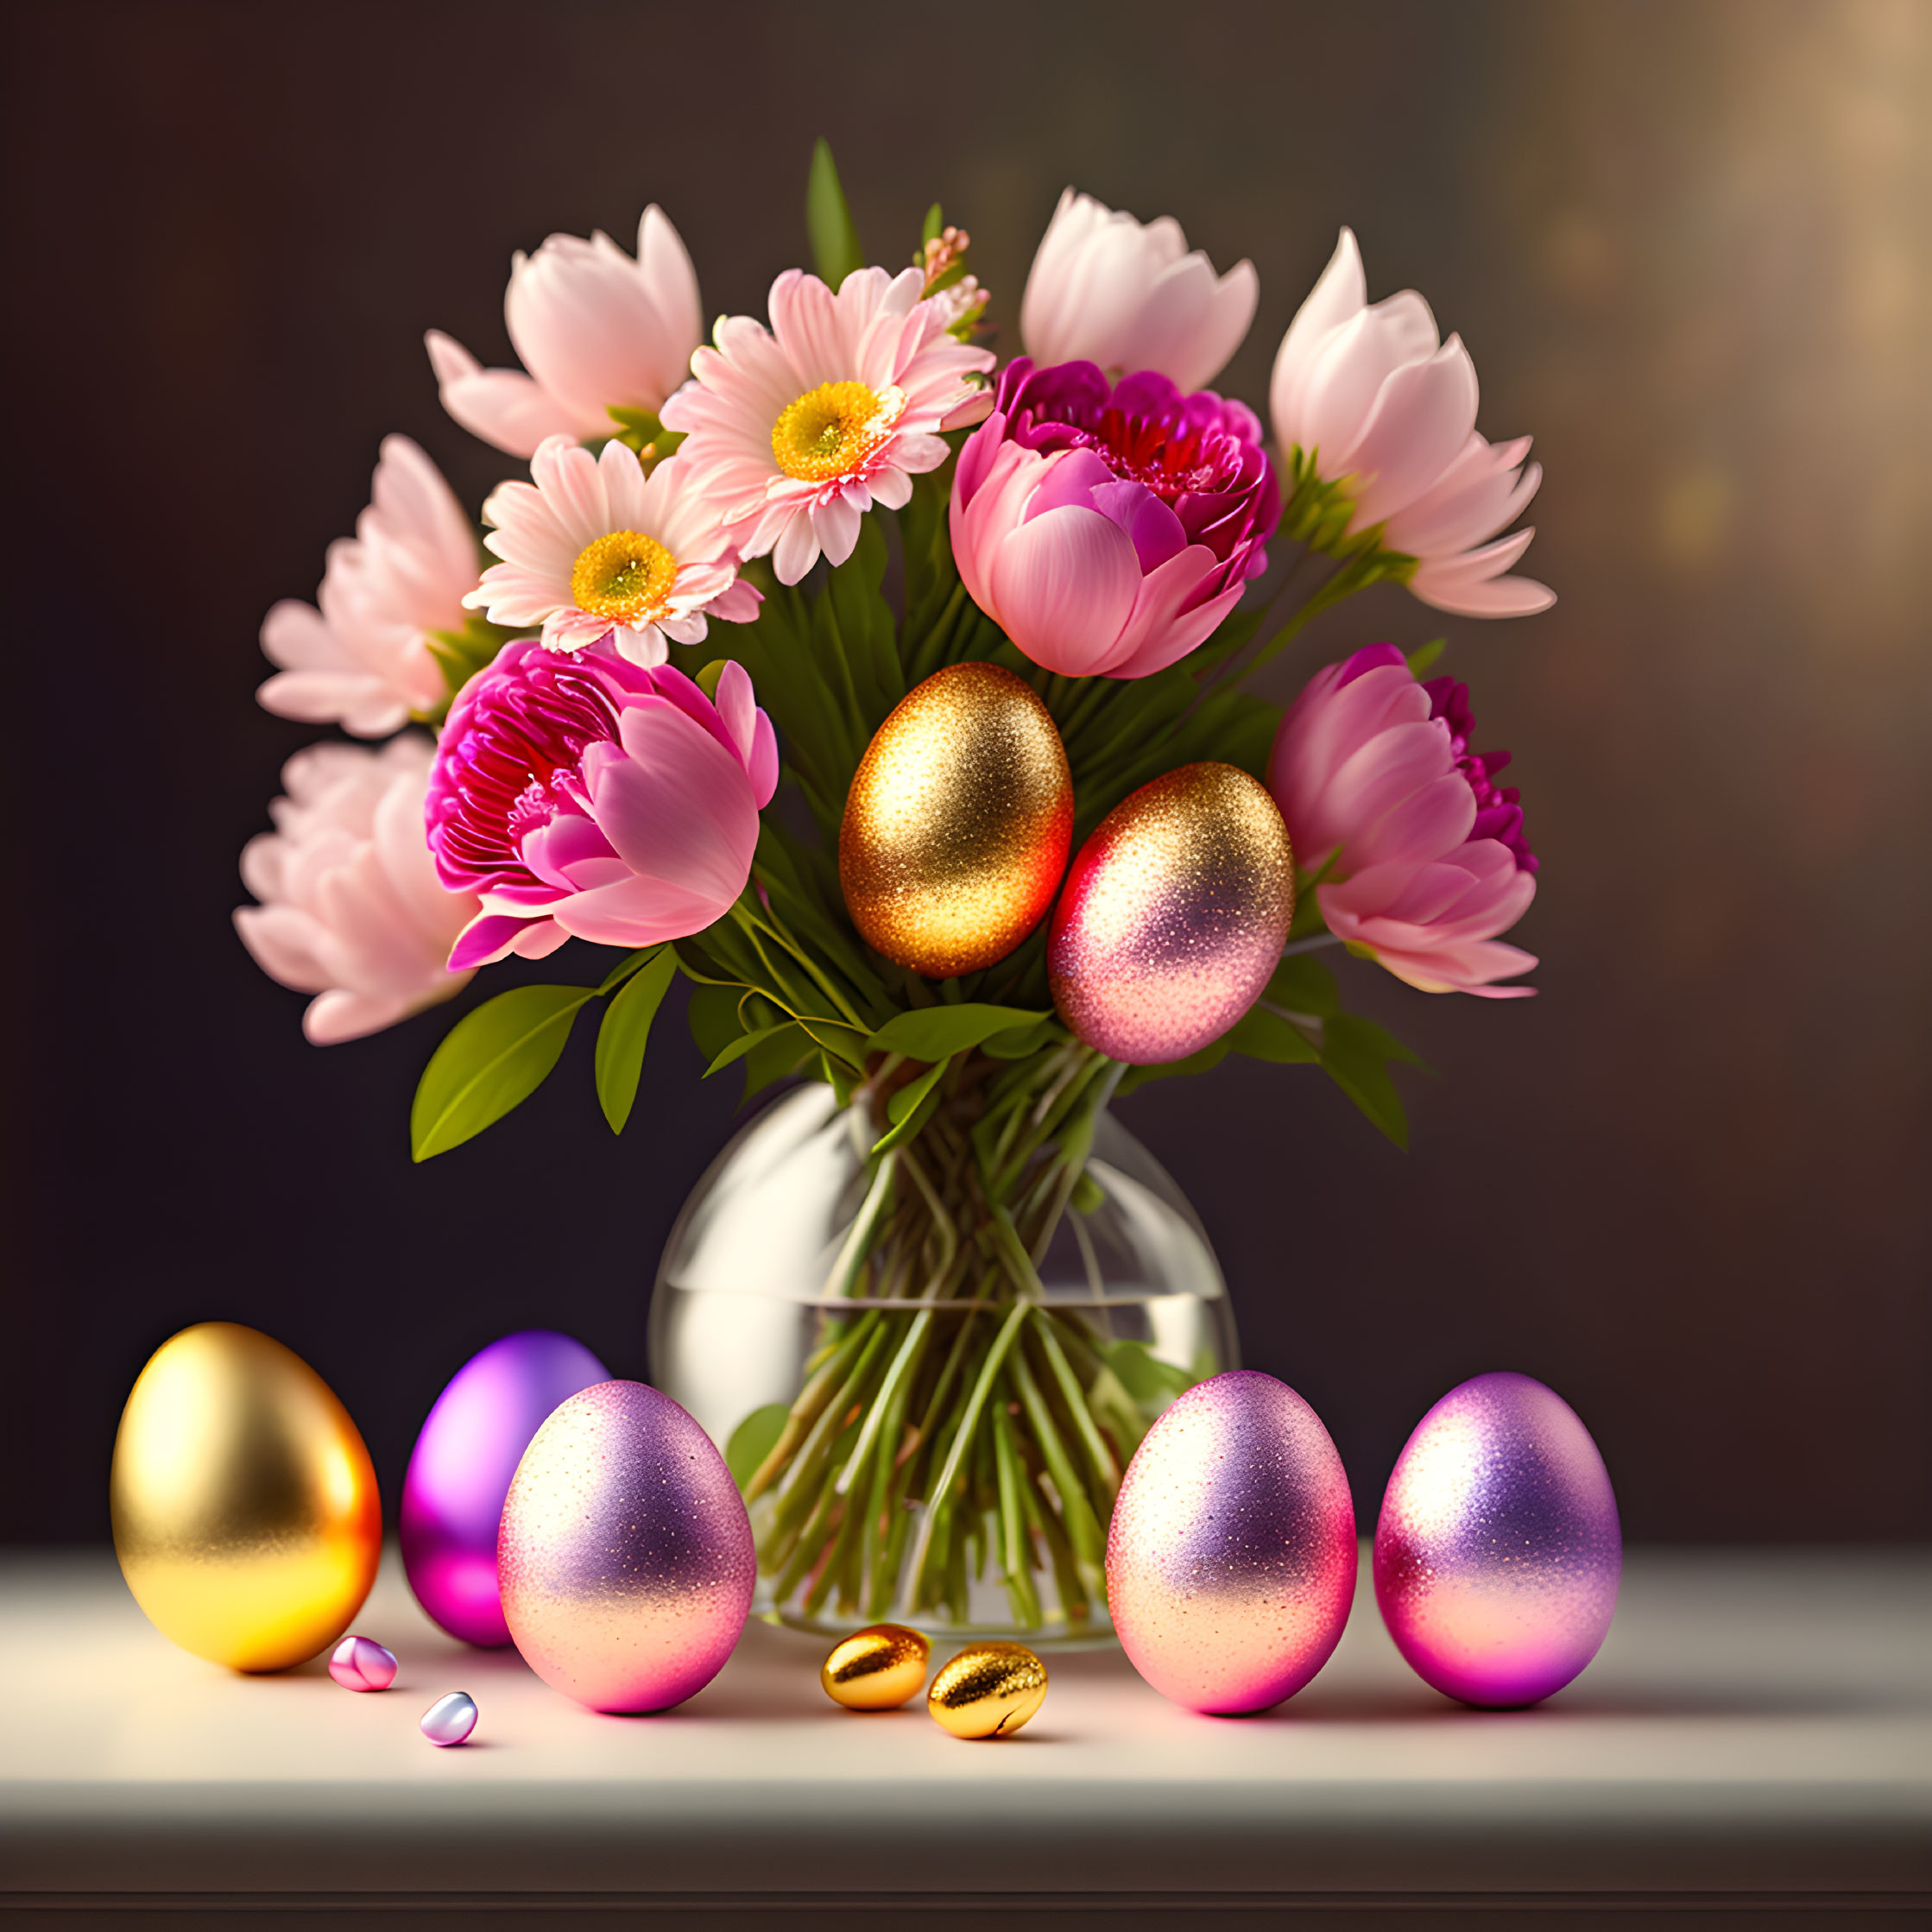  Easter eggs and an Easter bouquet